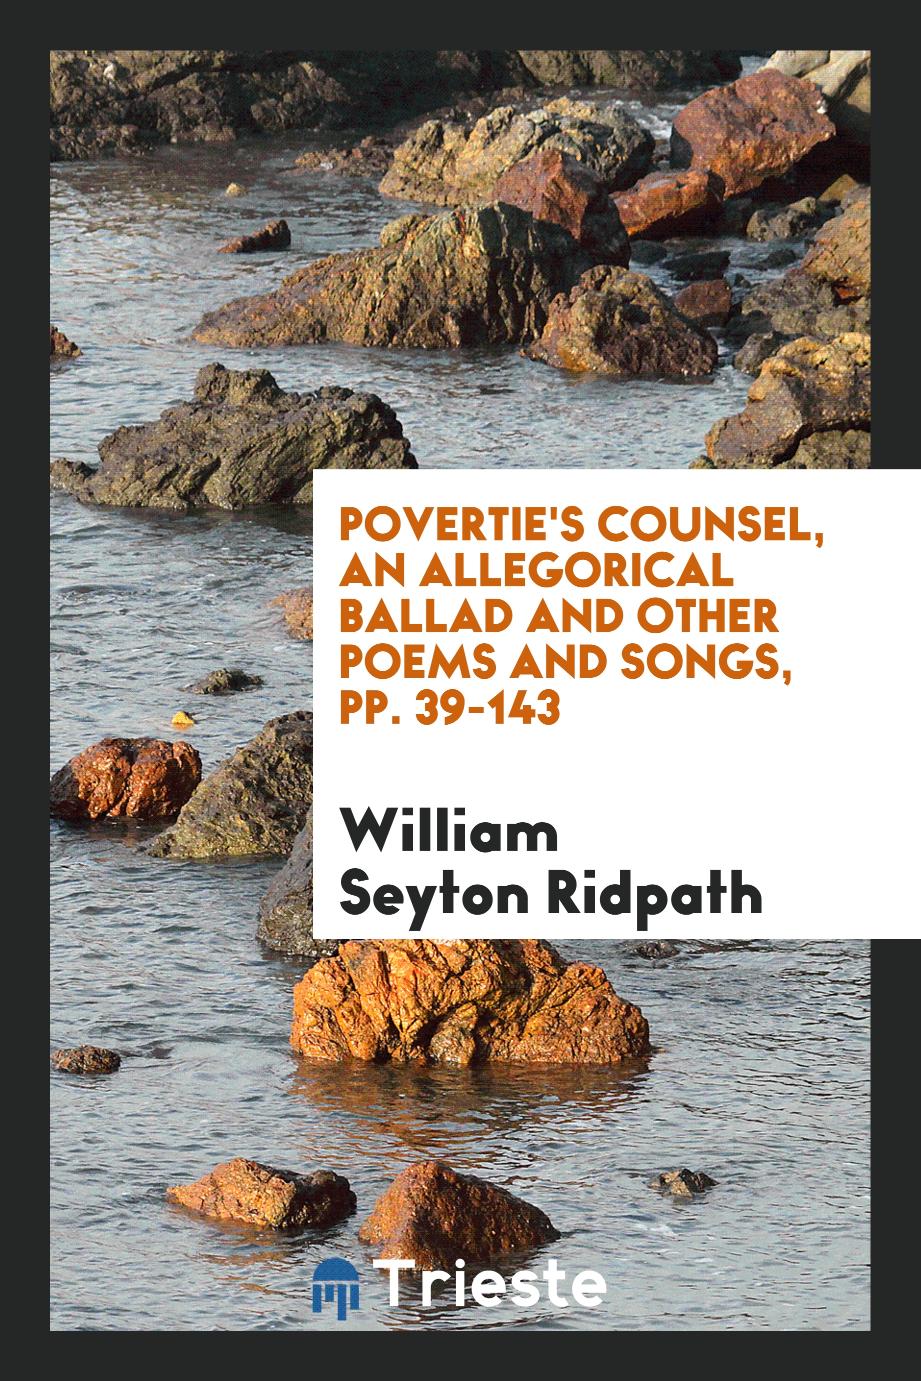 Povertie's Counsel, an Allegorical Ballad and Other Poems and Songs, pp. 39-143